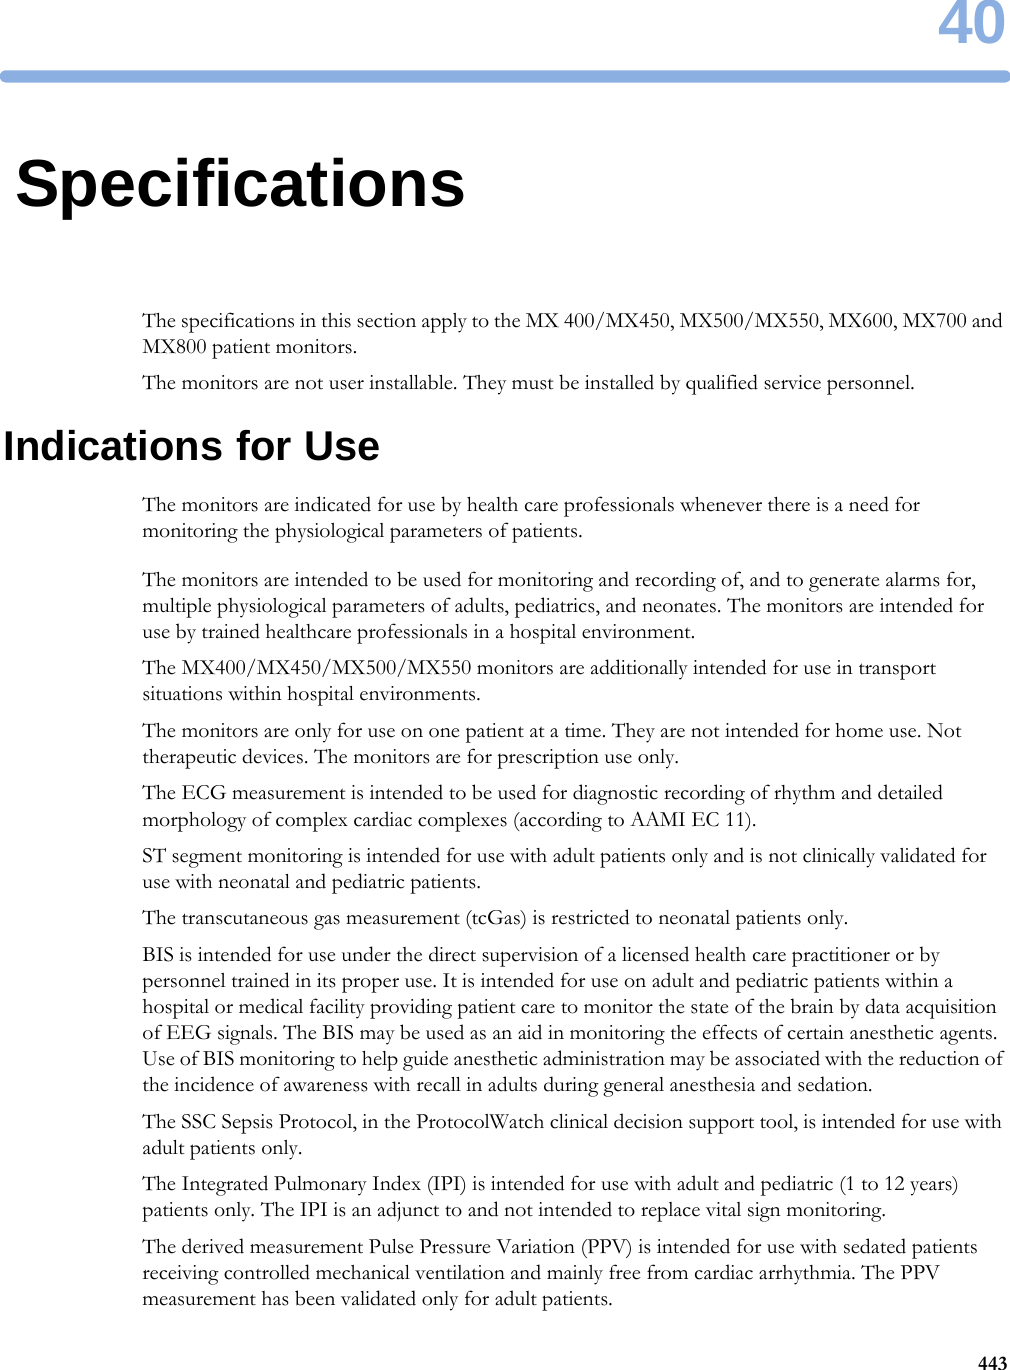 4044340SpecificationsThe specifications in this section apply to the MX 400/MX450, MX500/MX550, MX600, MX700 and MX800 patient monitors.The monitors are not user installable. They must be installed by qualified service personnel.Indications for UseThe monitors are indicated for use by health care professionals whenever there is a need for monitoring the physiological parameters of patients.The monitors are intended to be used for monitoring and recording of, and to generate alarms for, multiple physiological parameters of adults, pediatrics, and neonates. The monitors are intended for use by trained healthcare professionals in a hospital environment.The MX400/MX450/MX500/MX550 monitors are additionally intended for use in transport situations within hospital environments.The monitors are only for use on one patient at a time. They are not intended for home use. Not therapeutic devices. The monitors are for prescription use only.The ECG measurement is intended to be used for diagnostic recording of rhythm and detailed morphology of complex cardiac complexes (according to AAMI EC 11).ST segment monitoring is intended for use with adult patients only and is not clinically validated for use with neonatal and pediatric patients.The transcutaneous gas measurement (tcGas) is restricted to neonatal patients only.BIS is intended for use under the direct supervision of a licensed health care practitioner or by personnel trained in its proper use. It is intended for use on adult and pediatric patients within a hospital or medical facility providing patient care to monitor the state of the brain by data acquisition of EEG signals. The BIS may be used as an aid in monitoring the effects of certain anesthetic agents. Use of BIS monitoring to help guide anesthetic administration may be associated with the reduction of the incidence of awareness with recall in adults during general anesthesia and sedation.The SSC Sepsis Protocol, in the ProtocolWatch clinical decision support tool, is intended for use with adult patients only.The Integrated Pulmonary Index (IPI) is intended for use with adult and pediatric (1 to 12 years) patients only. The IPI is an adjunct to and not intended to replace vital sign monitoring.The derived measurement Pulse Pressure Variation (PPV) is intended for use with sedated patients receiving controlled mechanical ventilation and mainly free from cardiac arrhythmia. The PPV measurement has been validated only for adult patients.